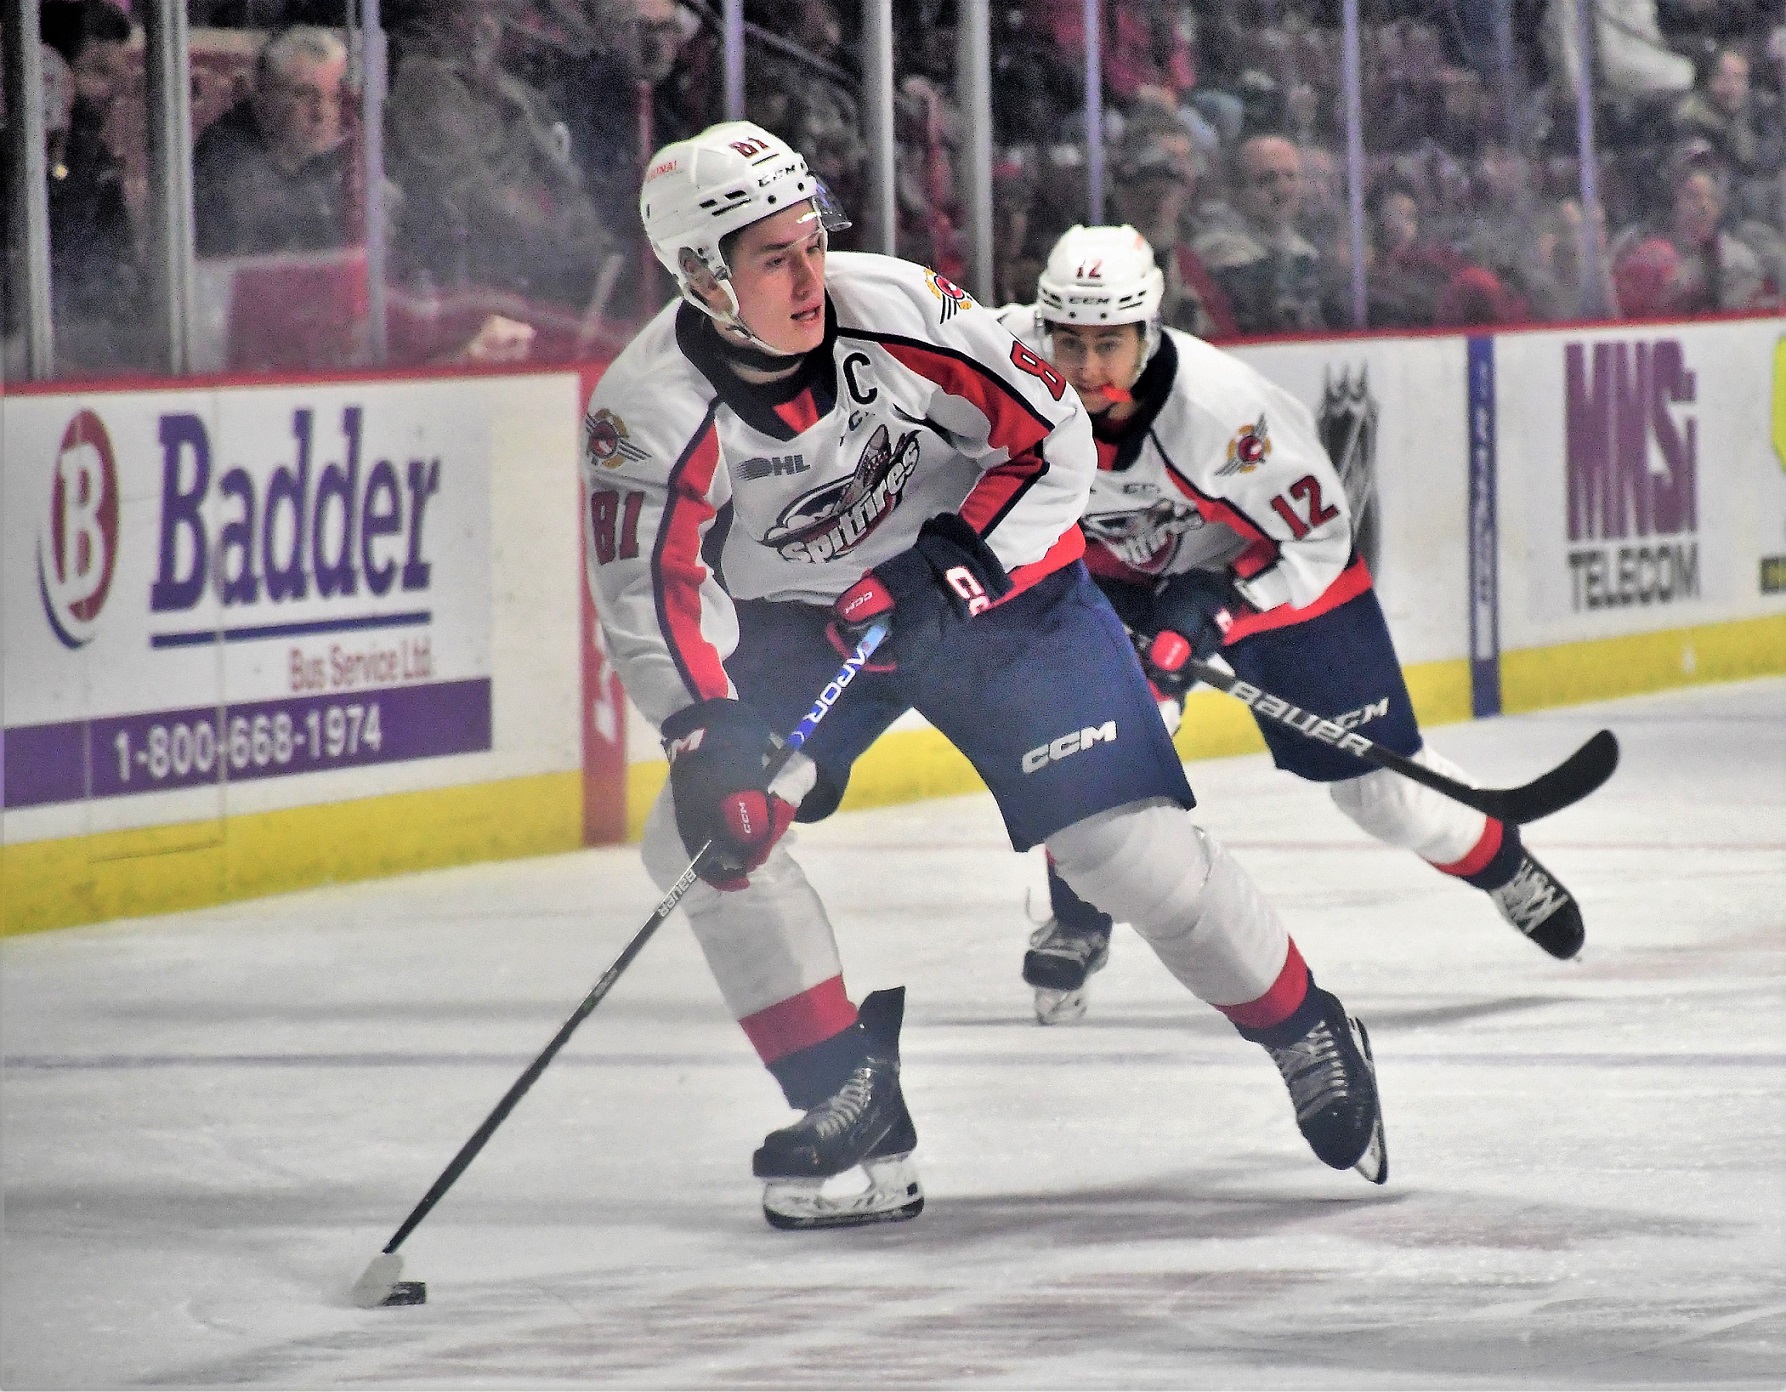 Windsor Spitfires lose in Game 7 of OHL Championship Series to the